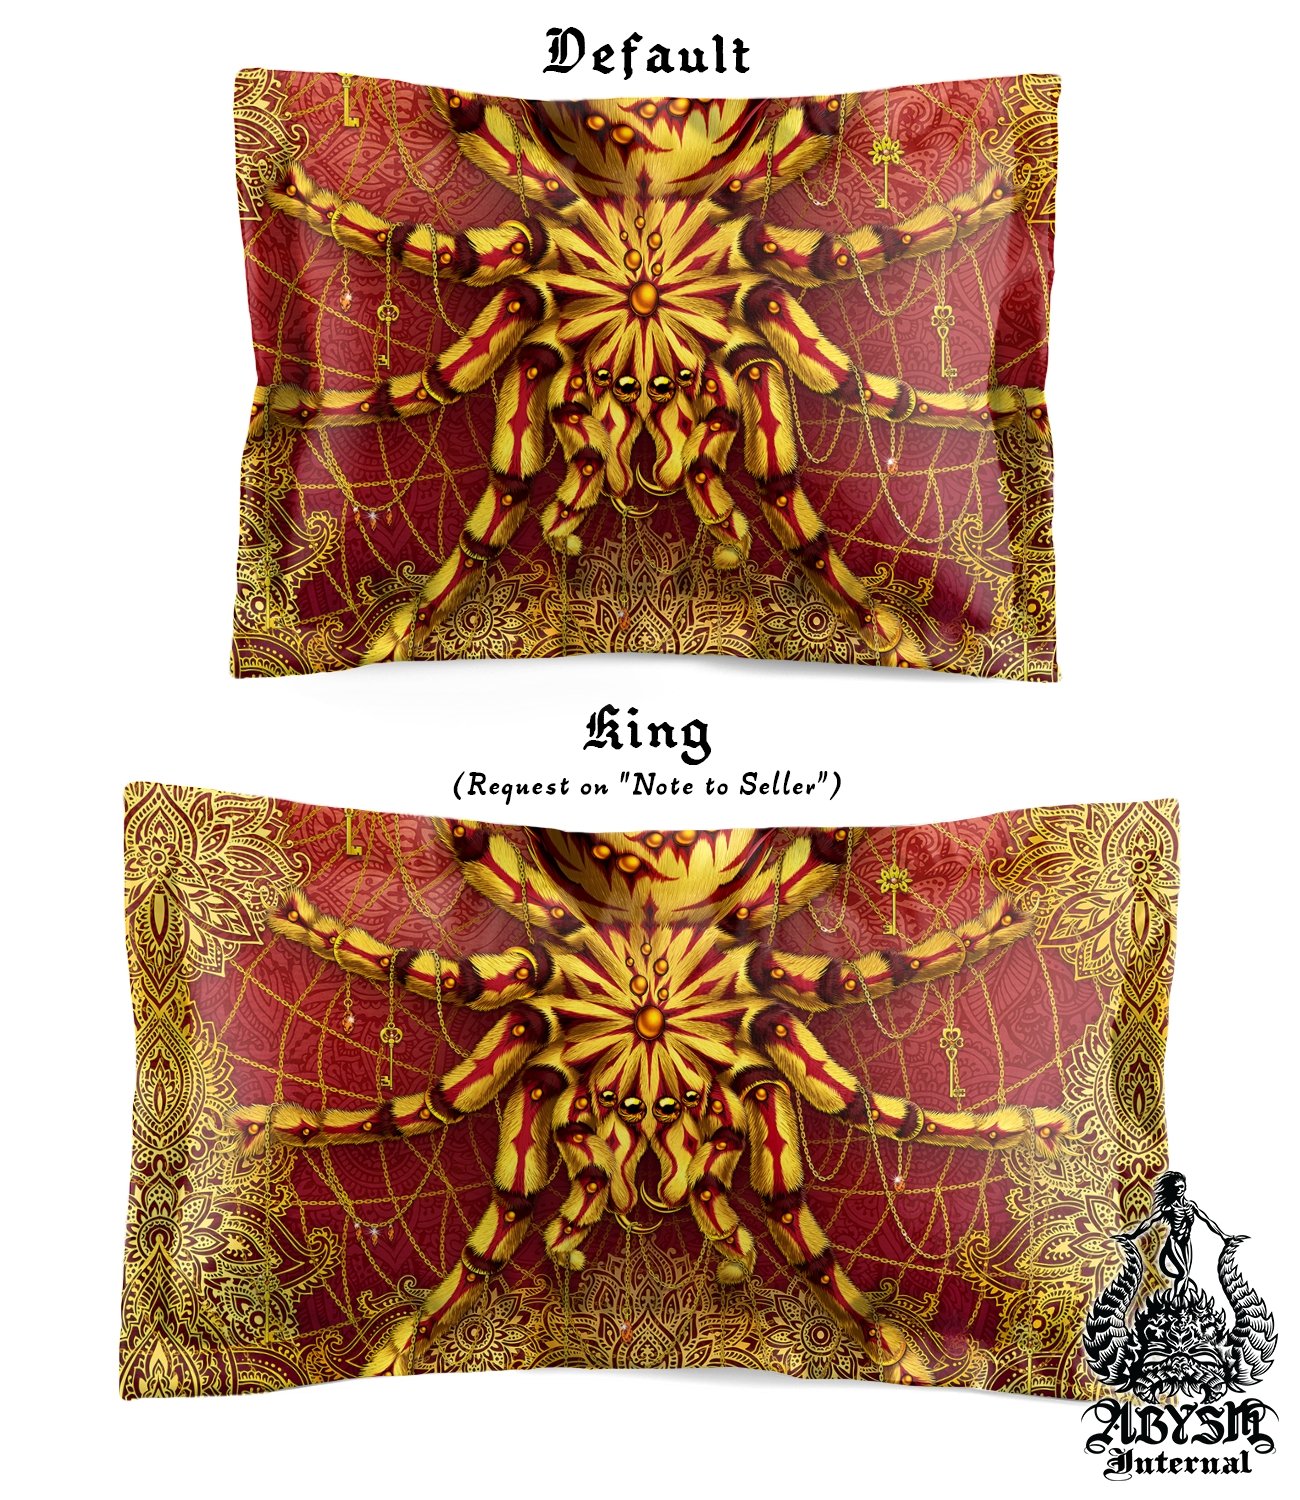 Boho Bedding Set, Comforter and Duvet, Bed Cover and Bedroom Decor, King, Queen and Twin Size - Tarantula Spider - Abysm Internal